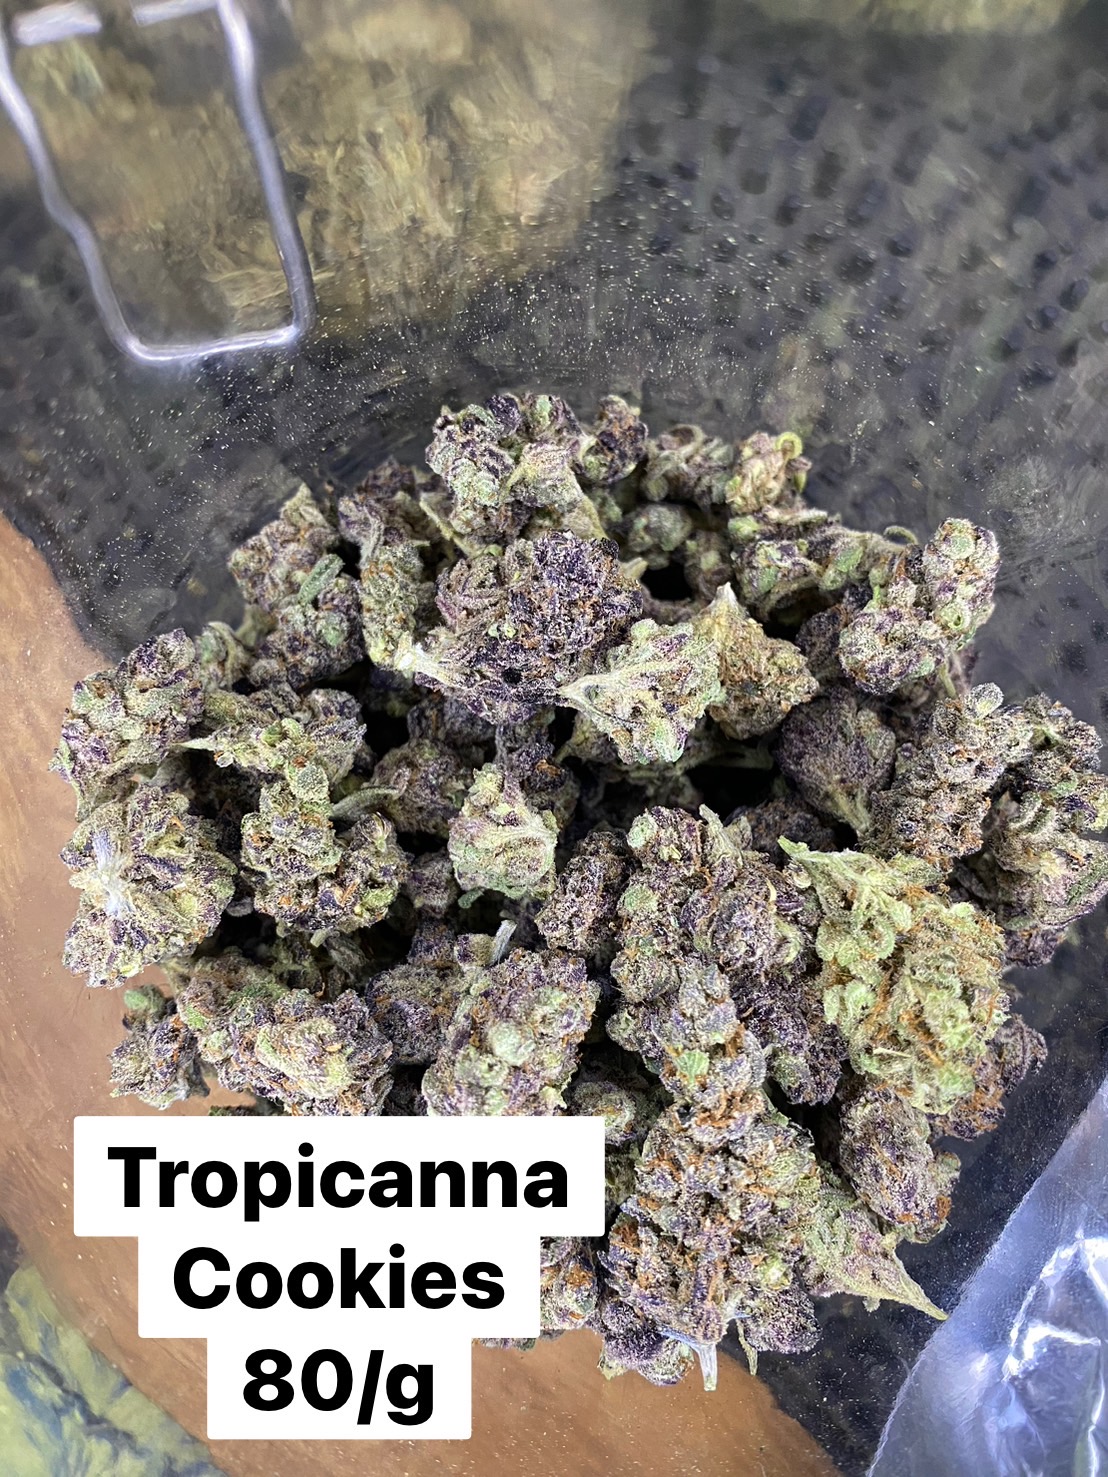 Product Image for Tropicana cookie